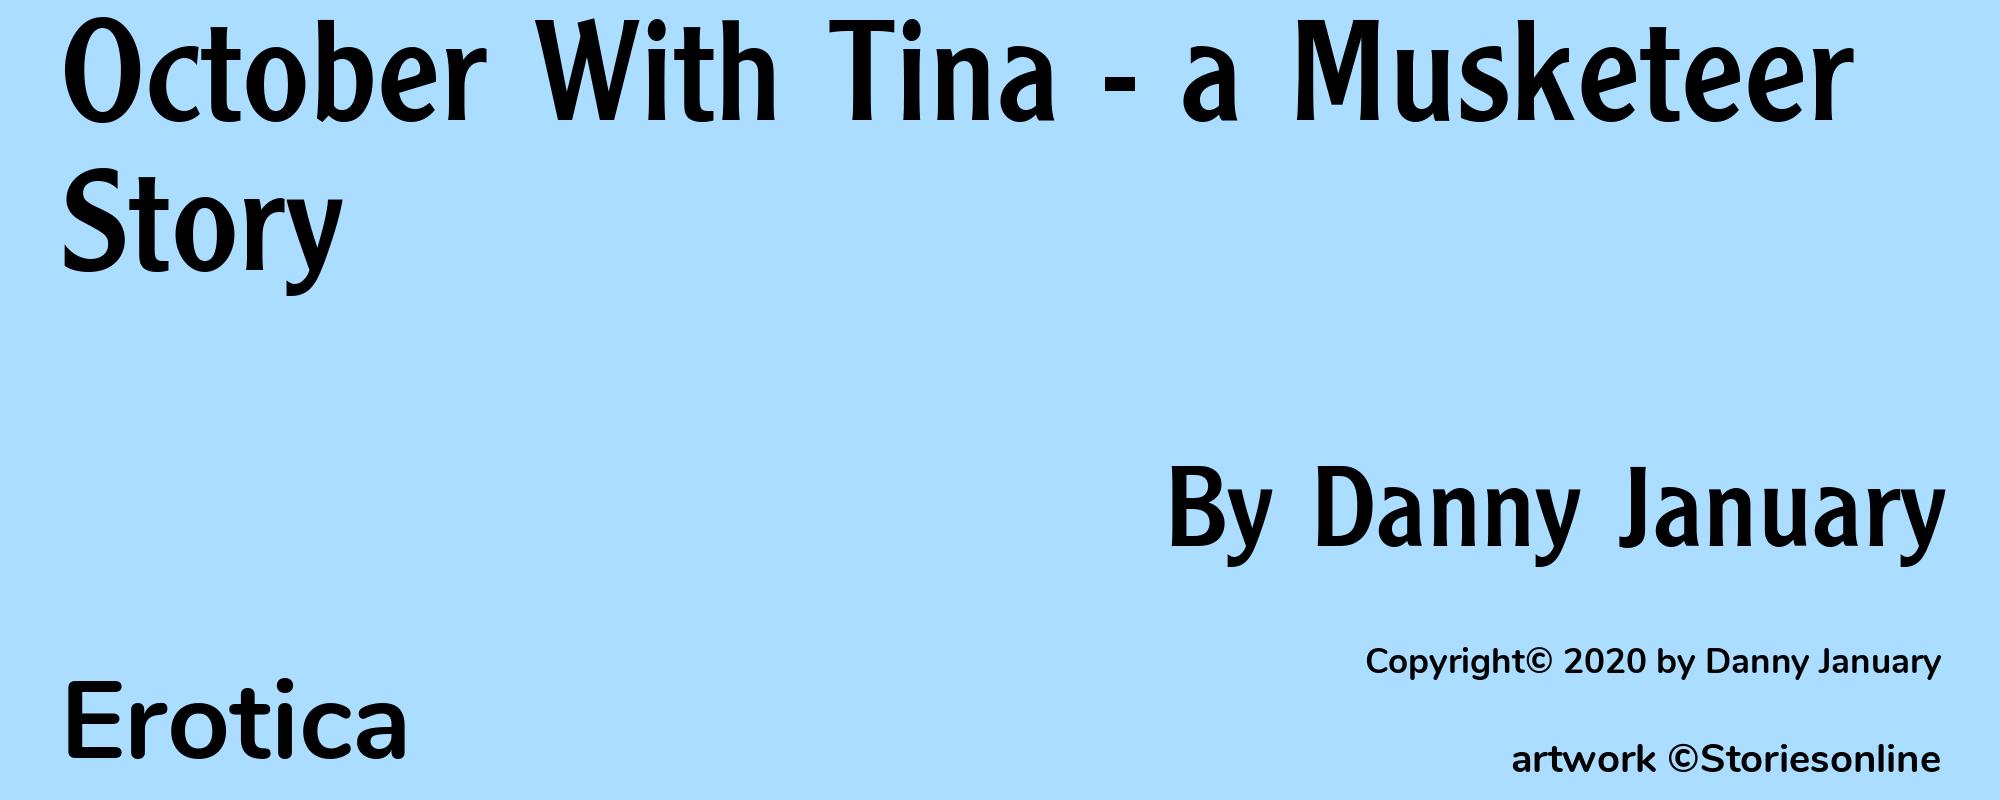 October With Tina - a Musketeer Story - Cover